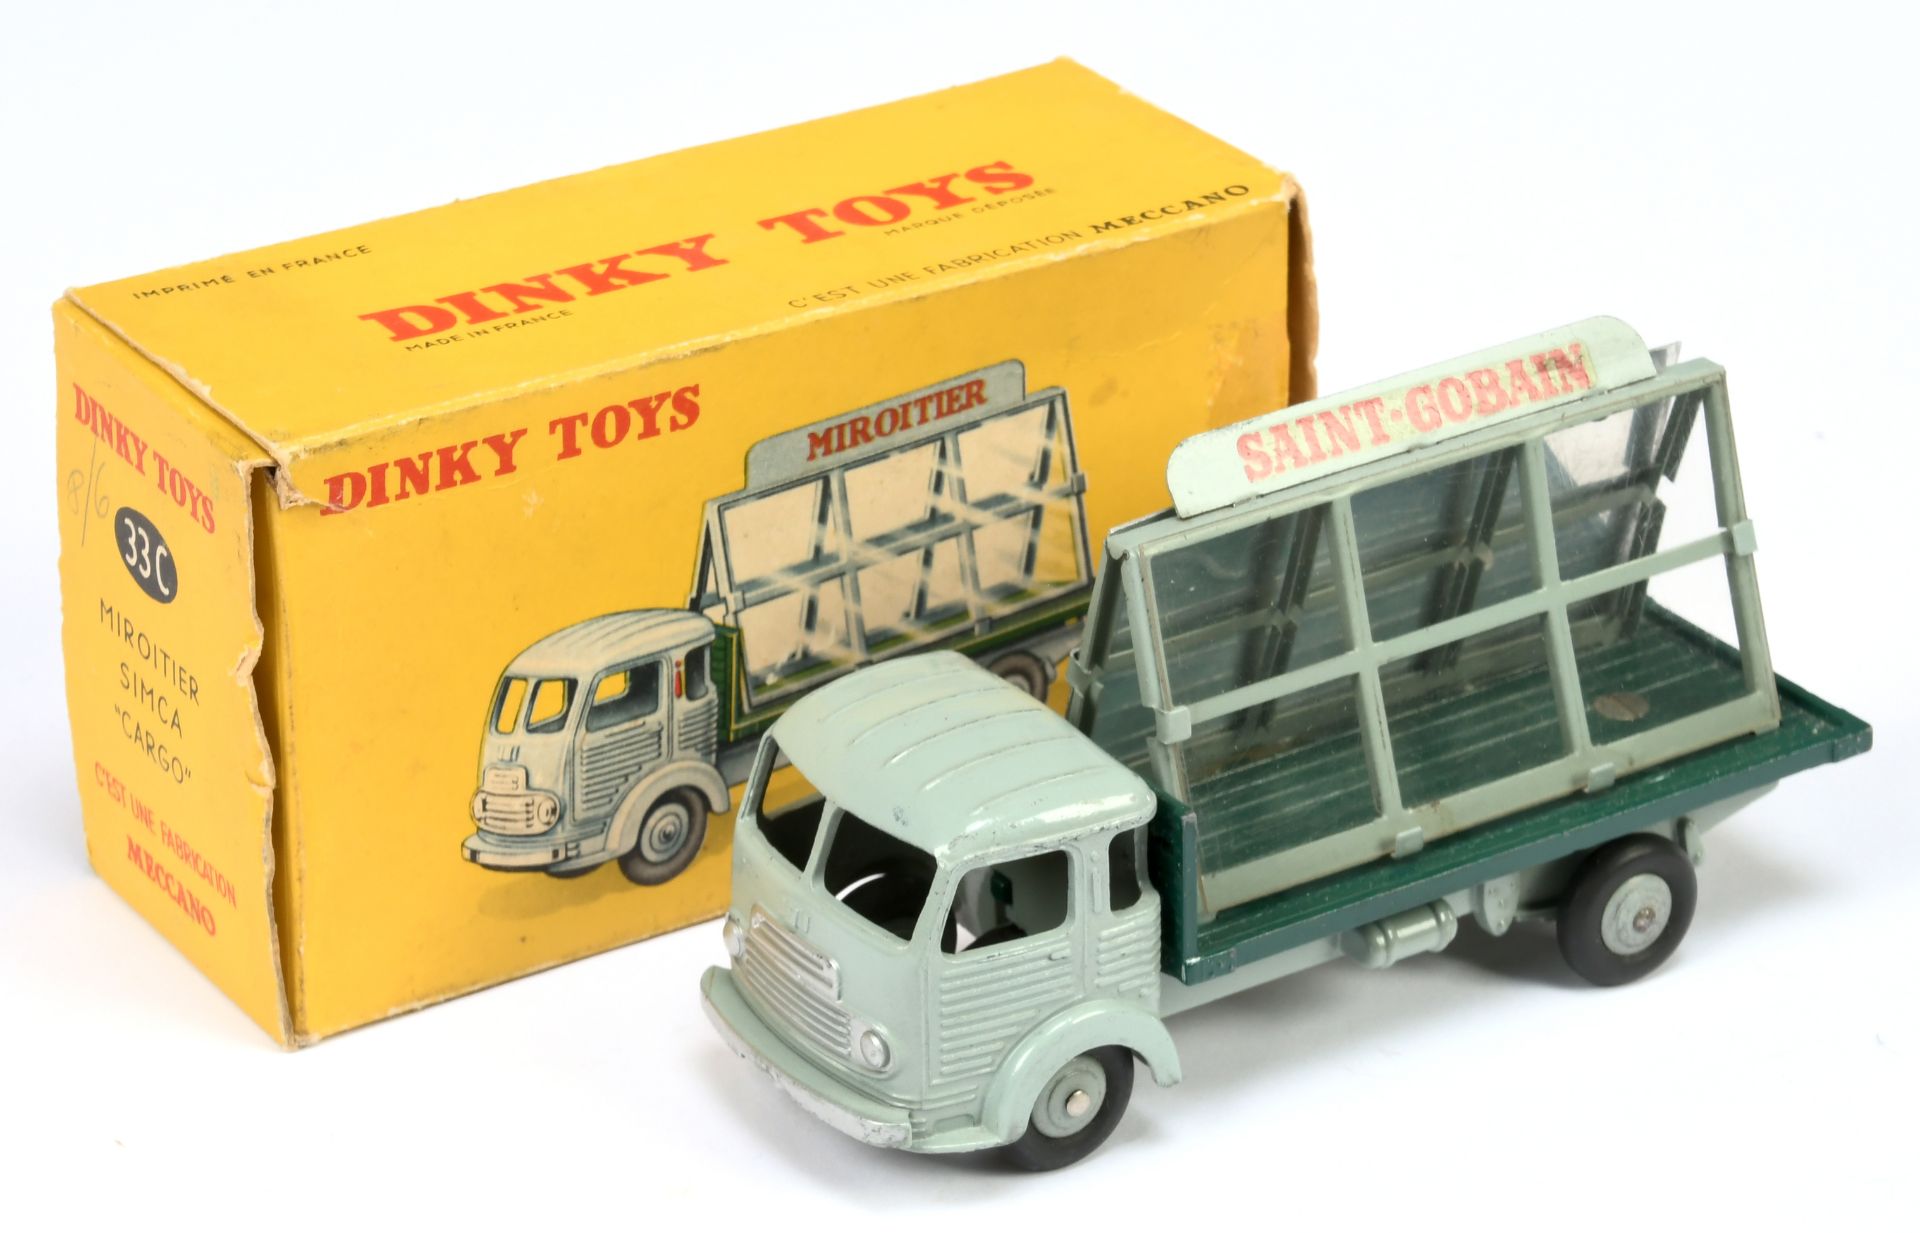 French Dinky Toys 33C Simca Cargo "Saint-Gobain/Miroitier" - Grey cab, chassis and convex hubs, g...